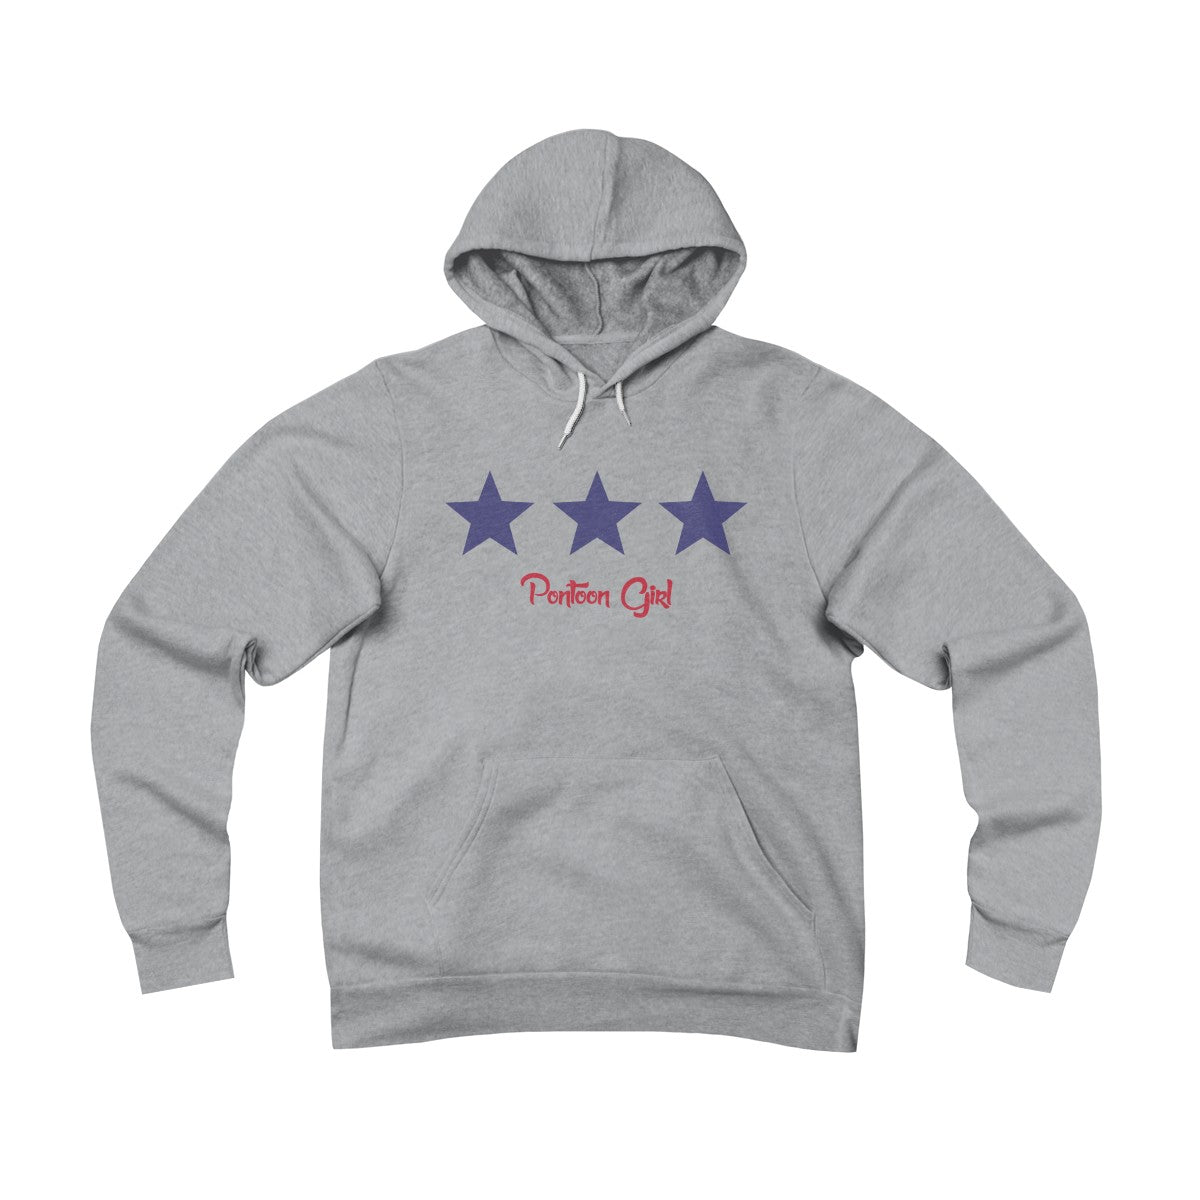 Pontoon Girl - Red White and Toon - Classic Flag Hoodie